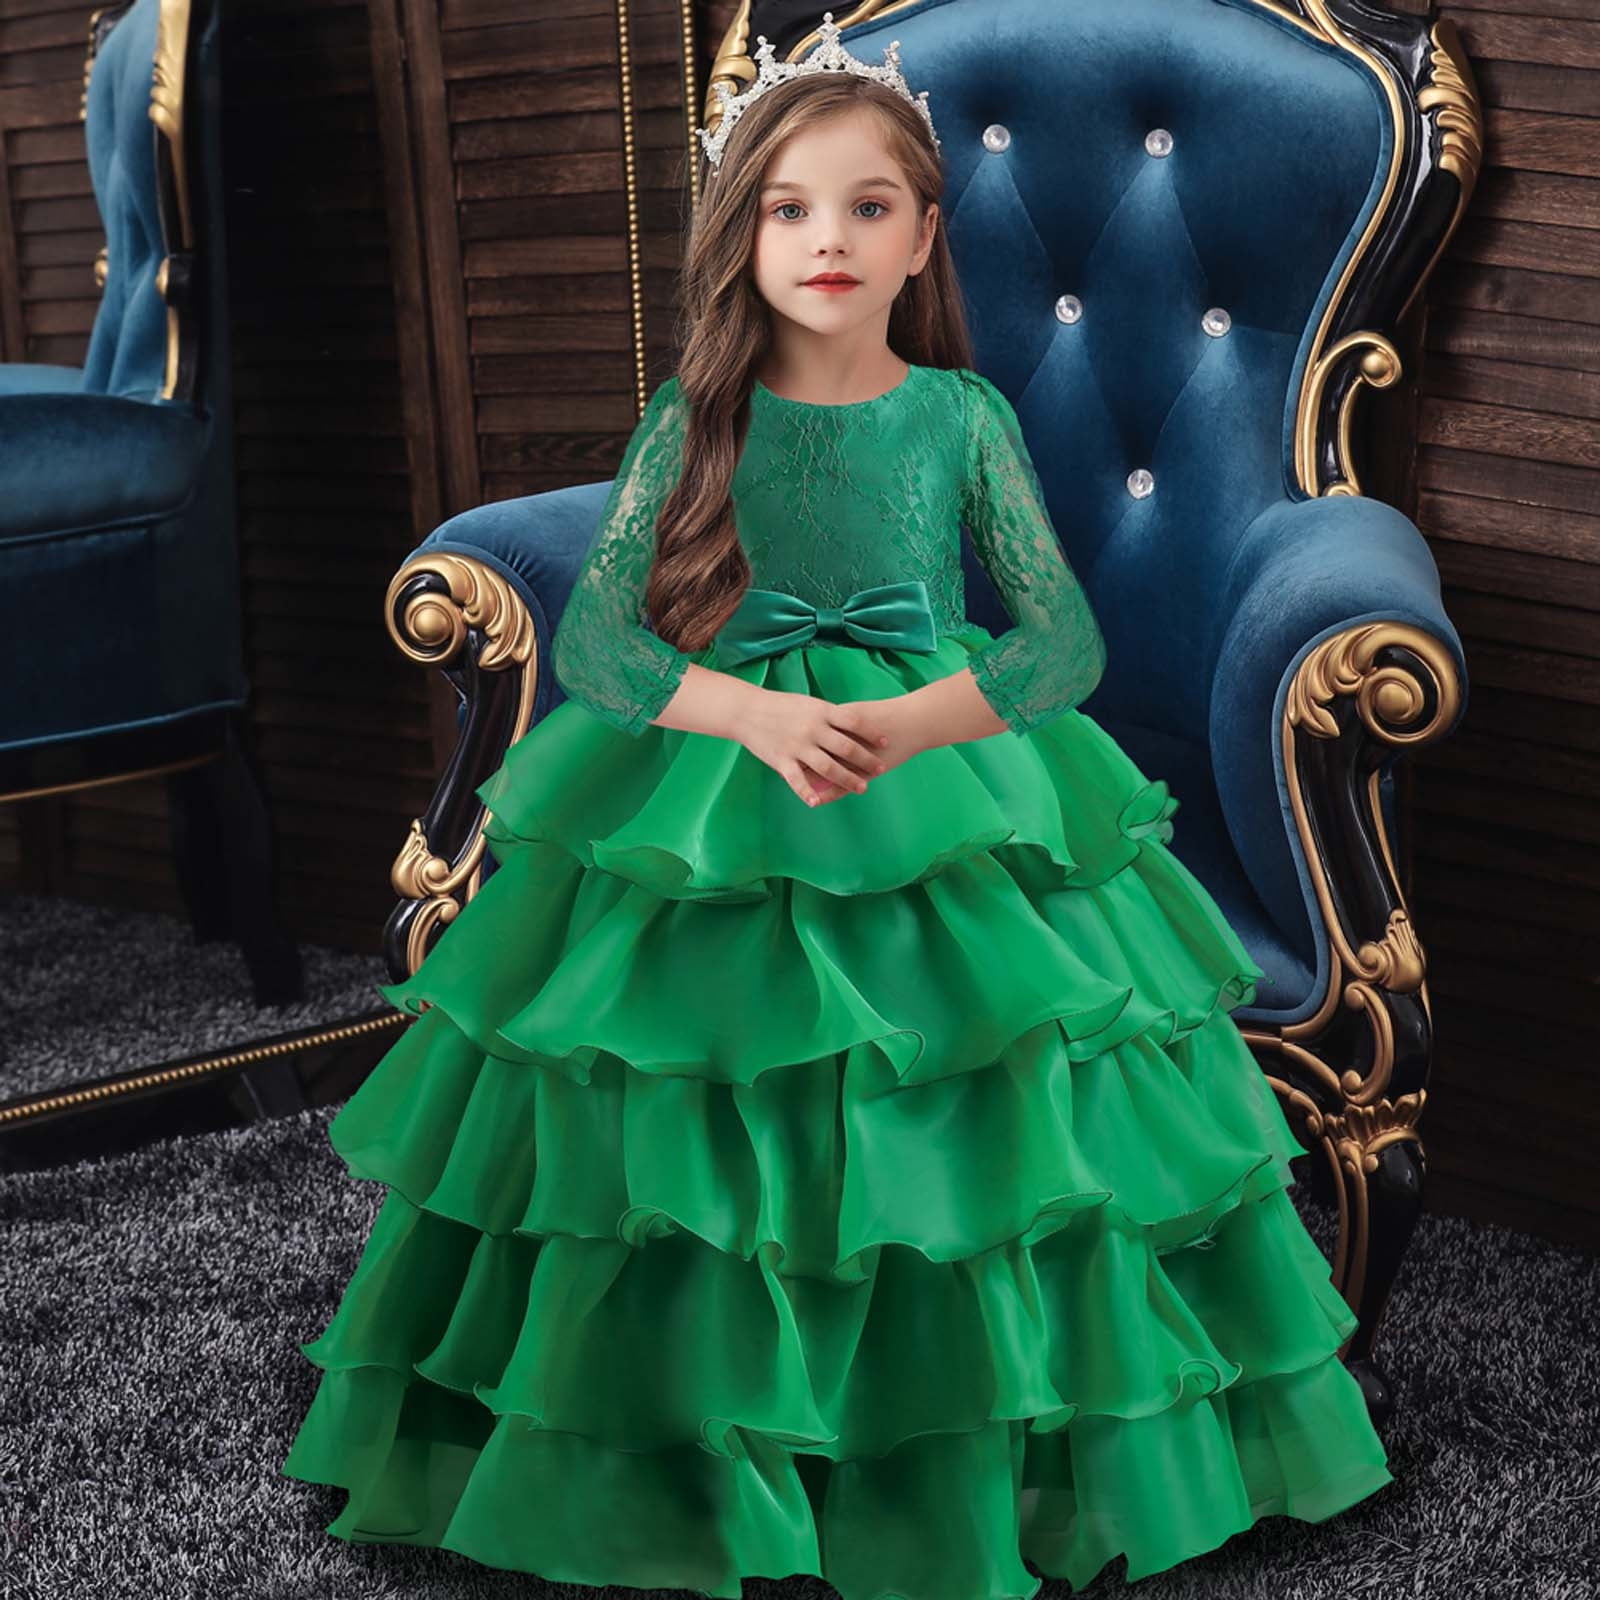 Buy HOIZOSG Belle Princess Dress Up for Girls Beauty and The Beast  Halloween Costume Christmas Birthday Party Gown w/Arm Sleeves 6-7T Online  at Low Prices in India - Amazon.in